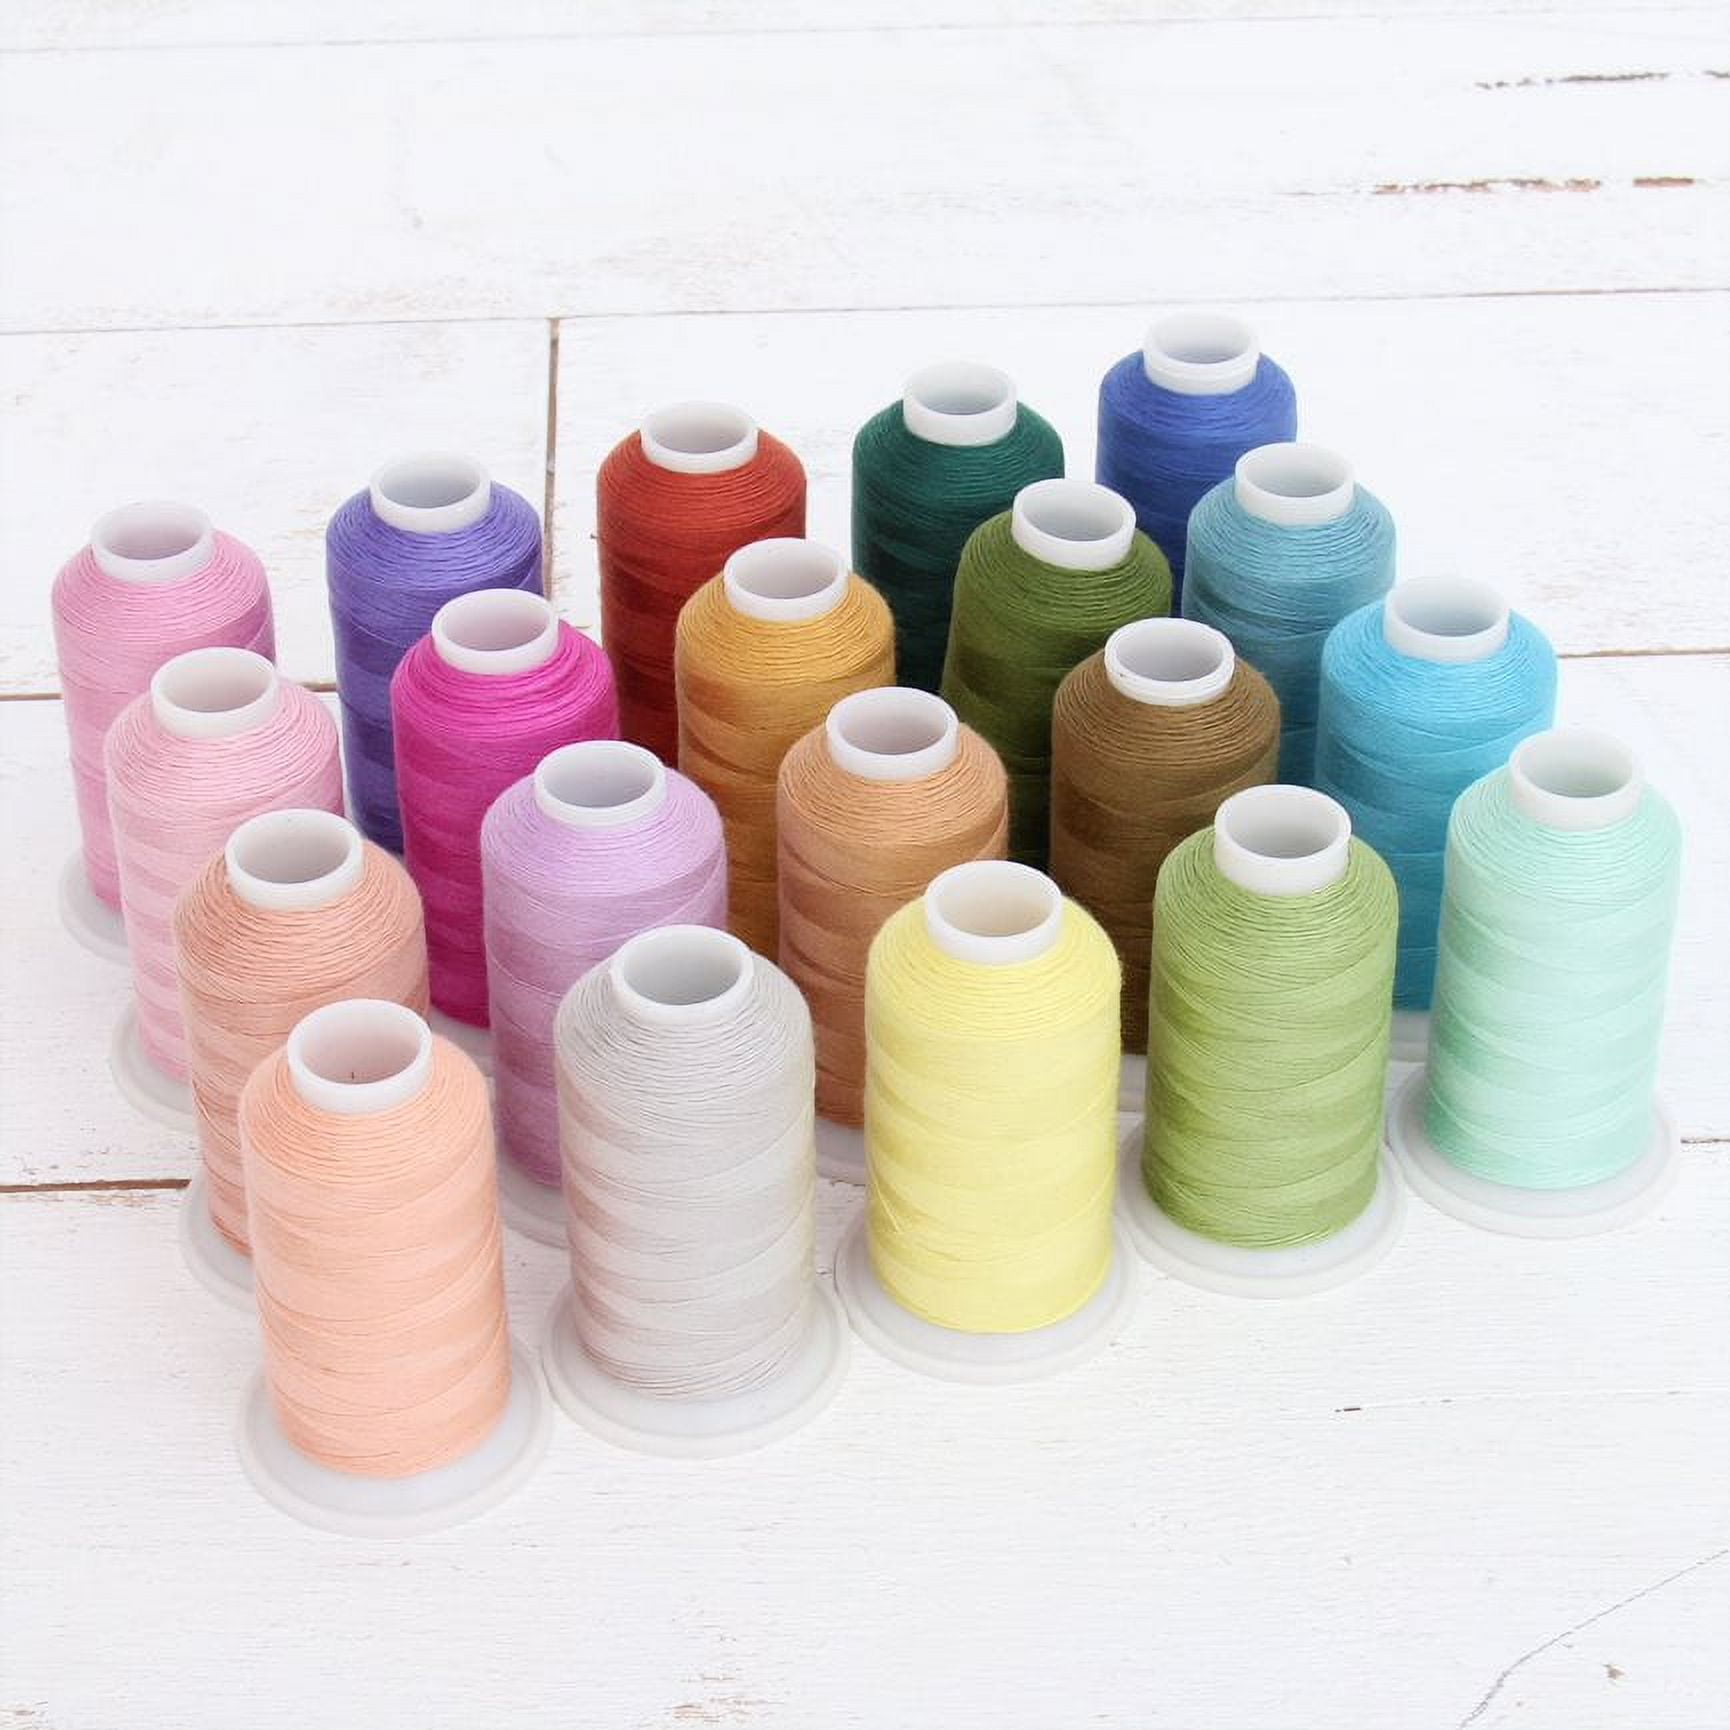 FASHION CLUSTER Cotton Threads for Sewing Knitting Purpose (1 Roll